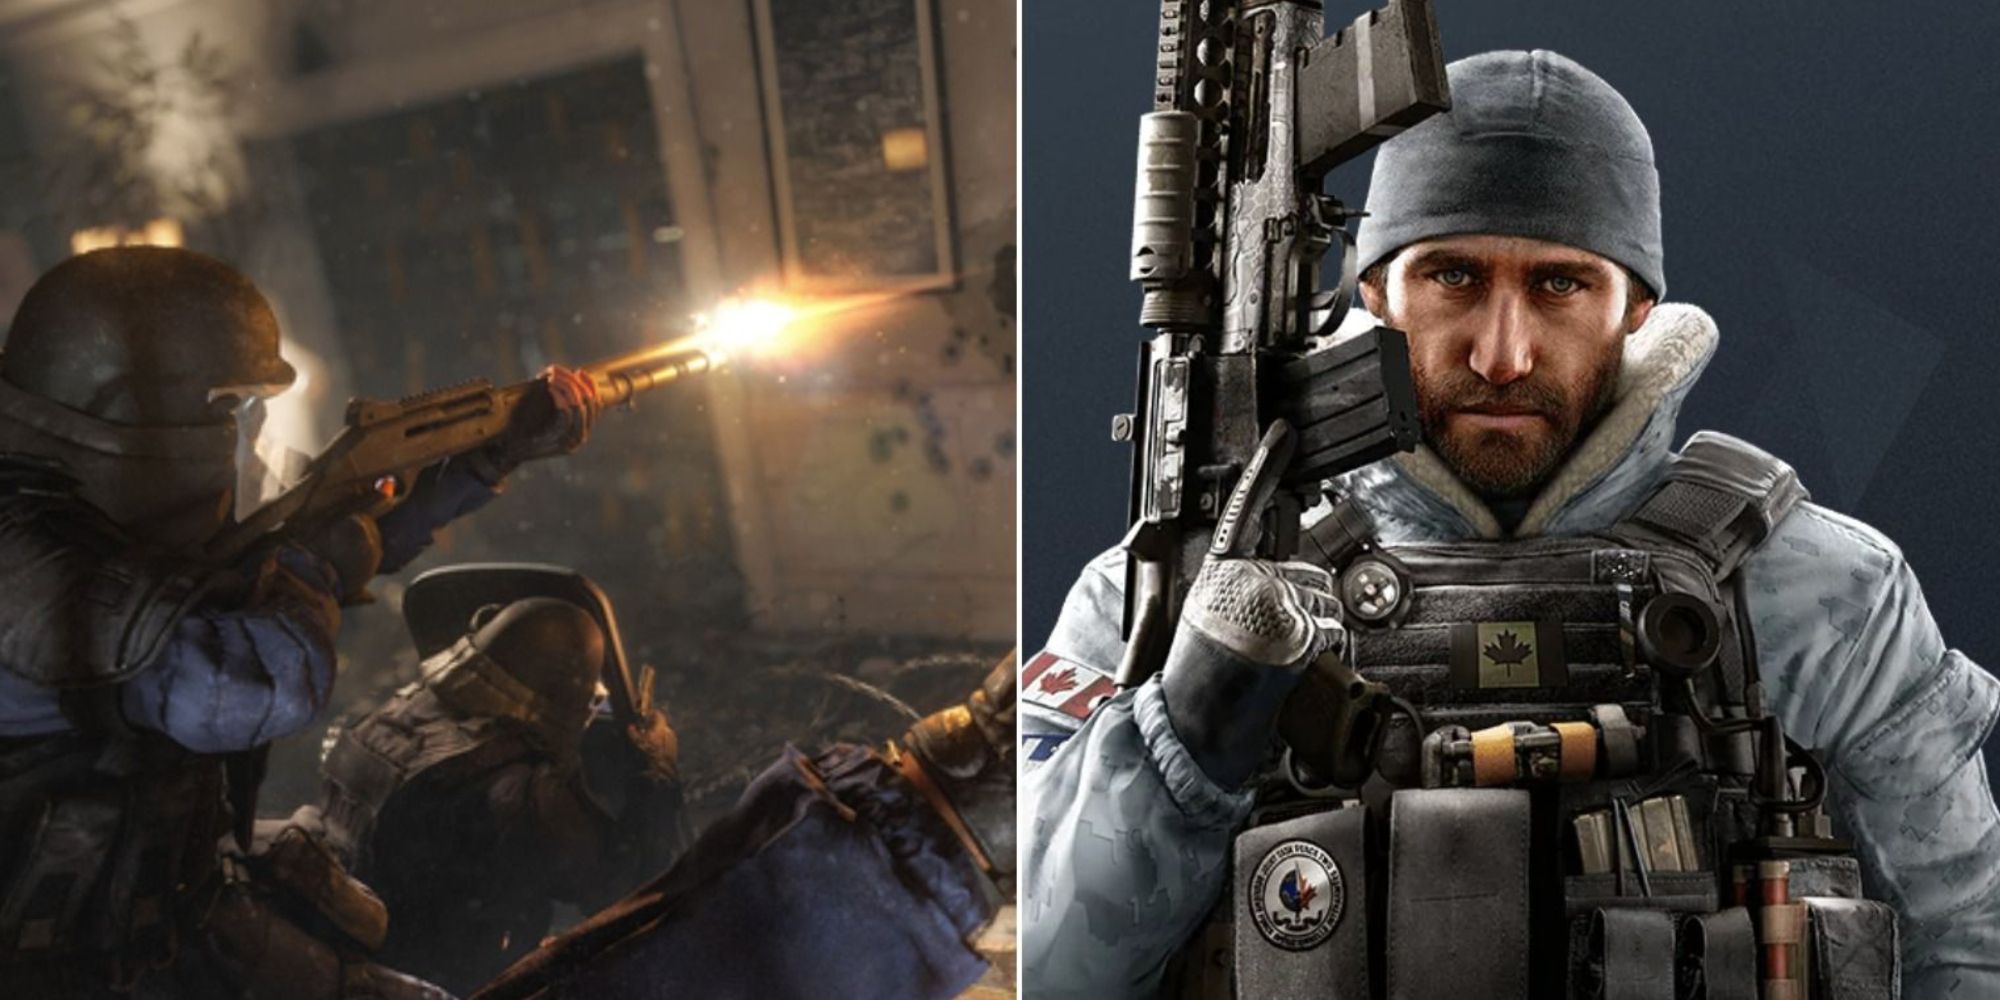 Buck and attackers split image from Rainbow Six Siege